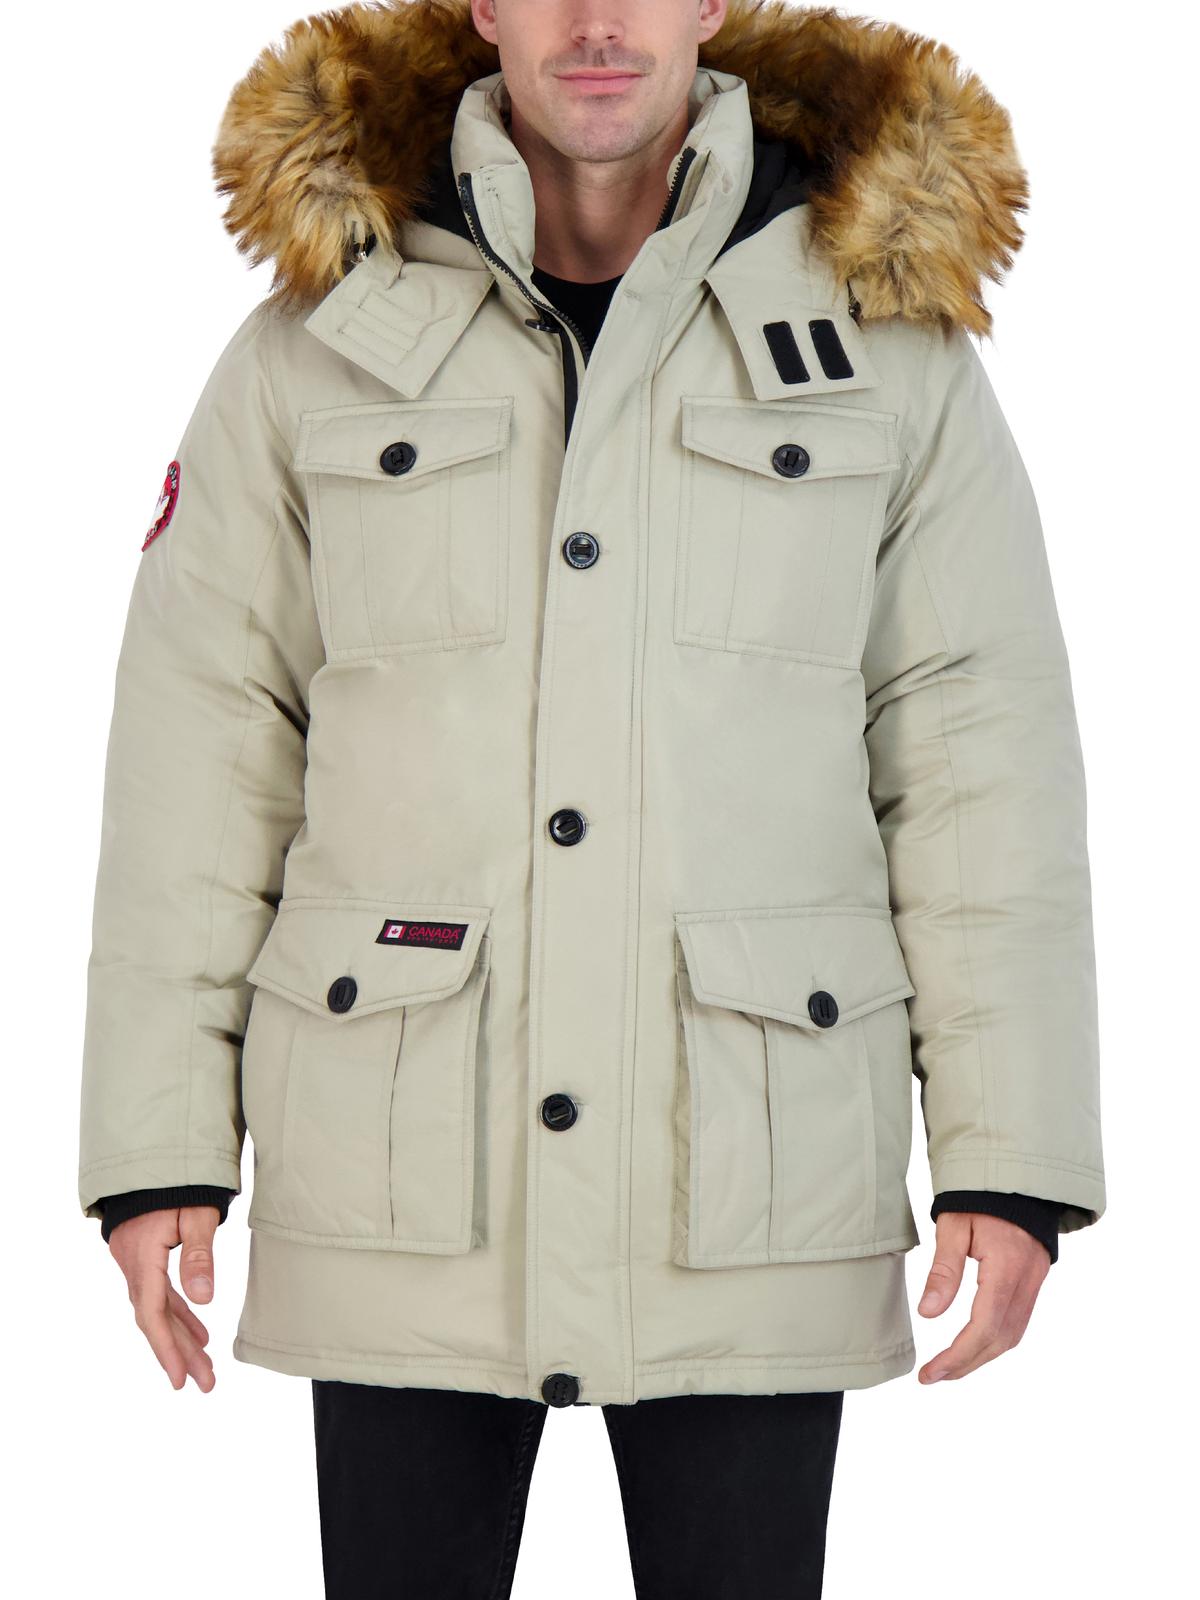 Canada Weather Gear Parka Coat for Men-Insulated Winter Jacket w/ Faux ...